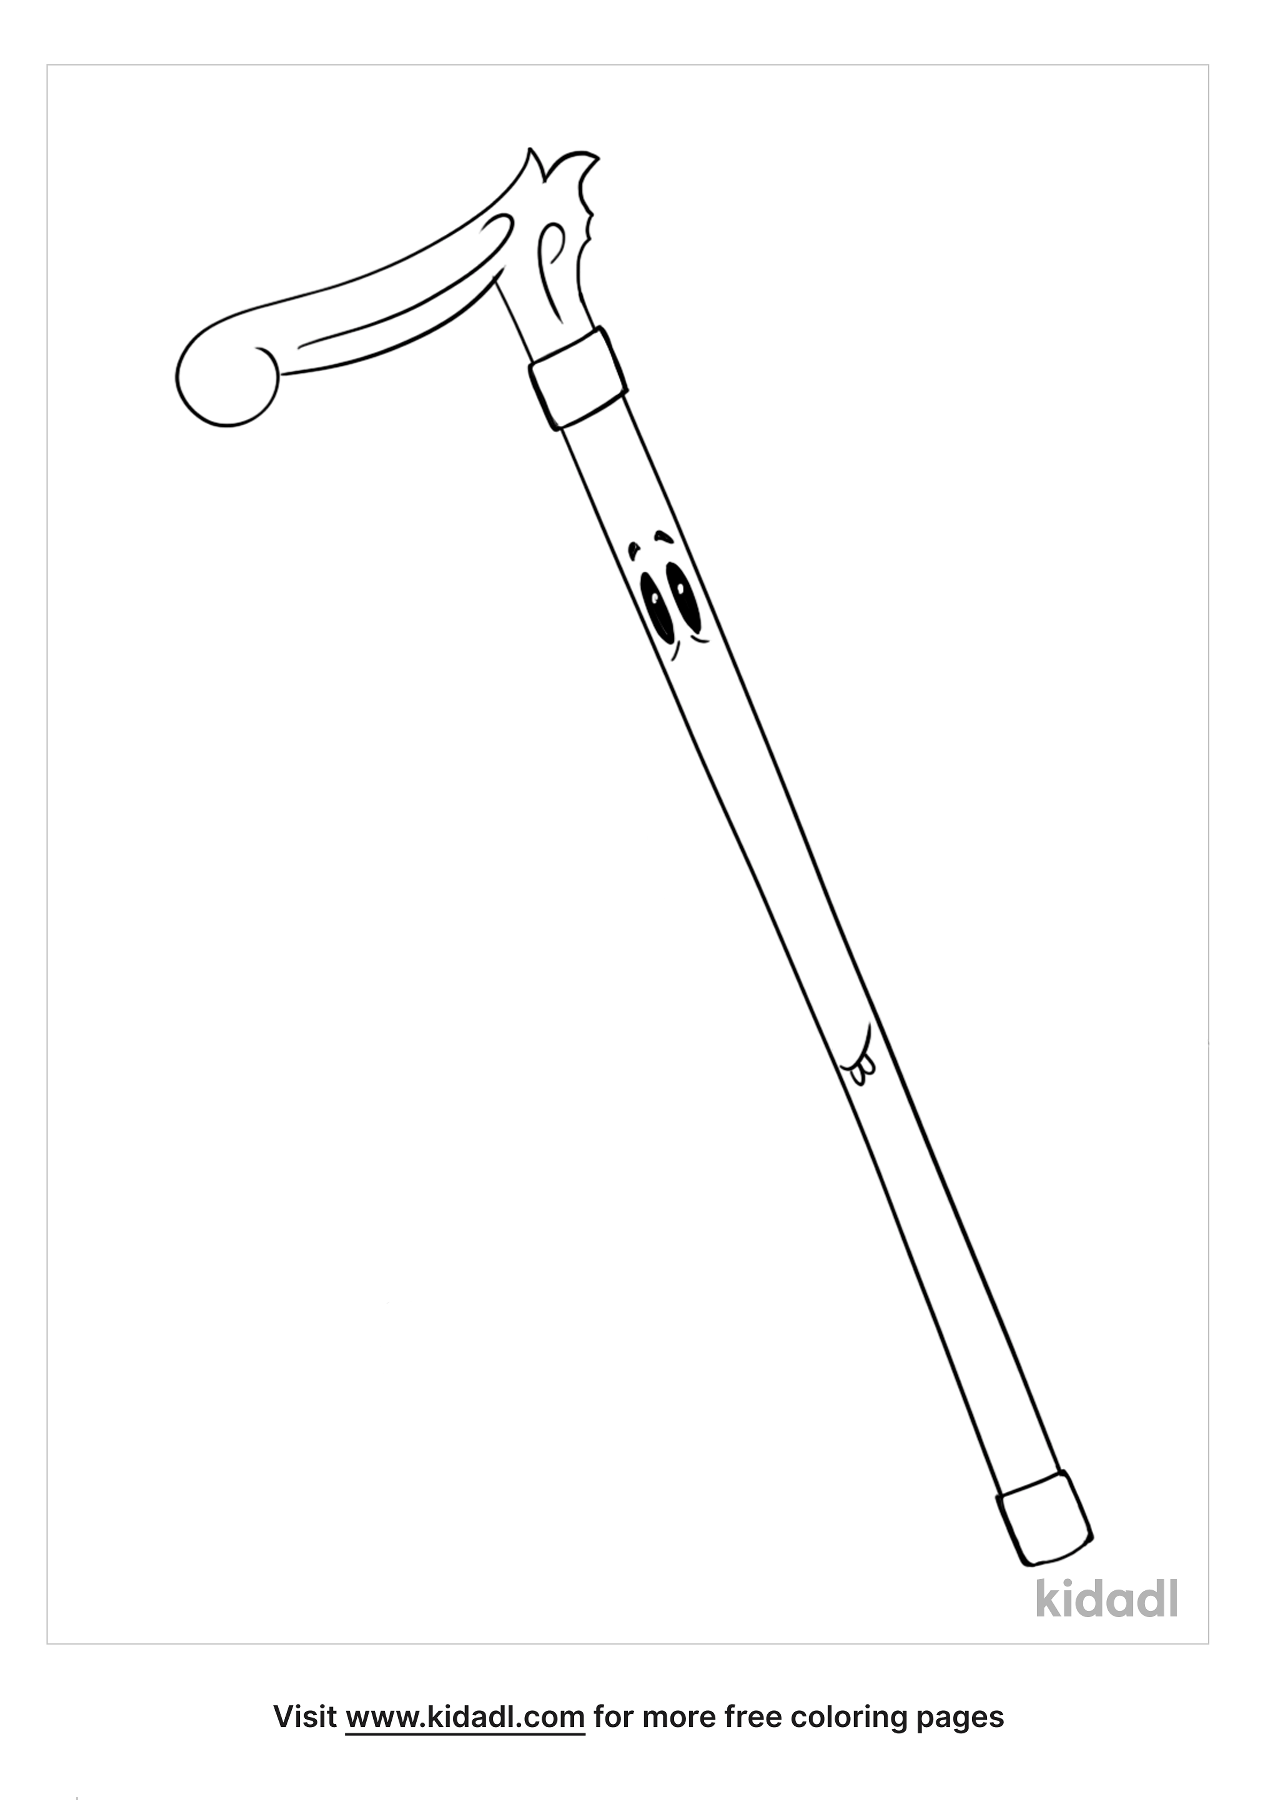 Walking Stick Coloring Pages | Free Environment-and-nature Coloring Pages |  Kidadl